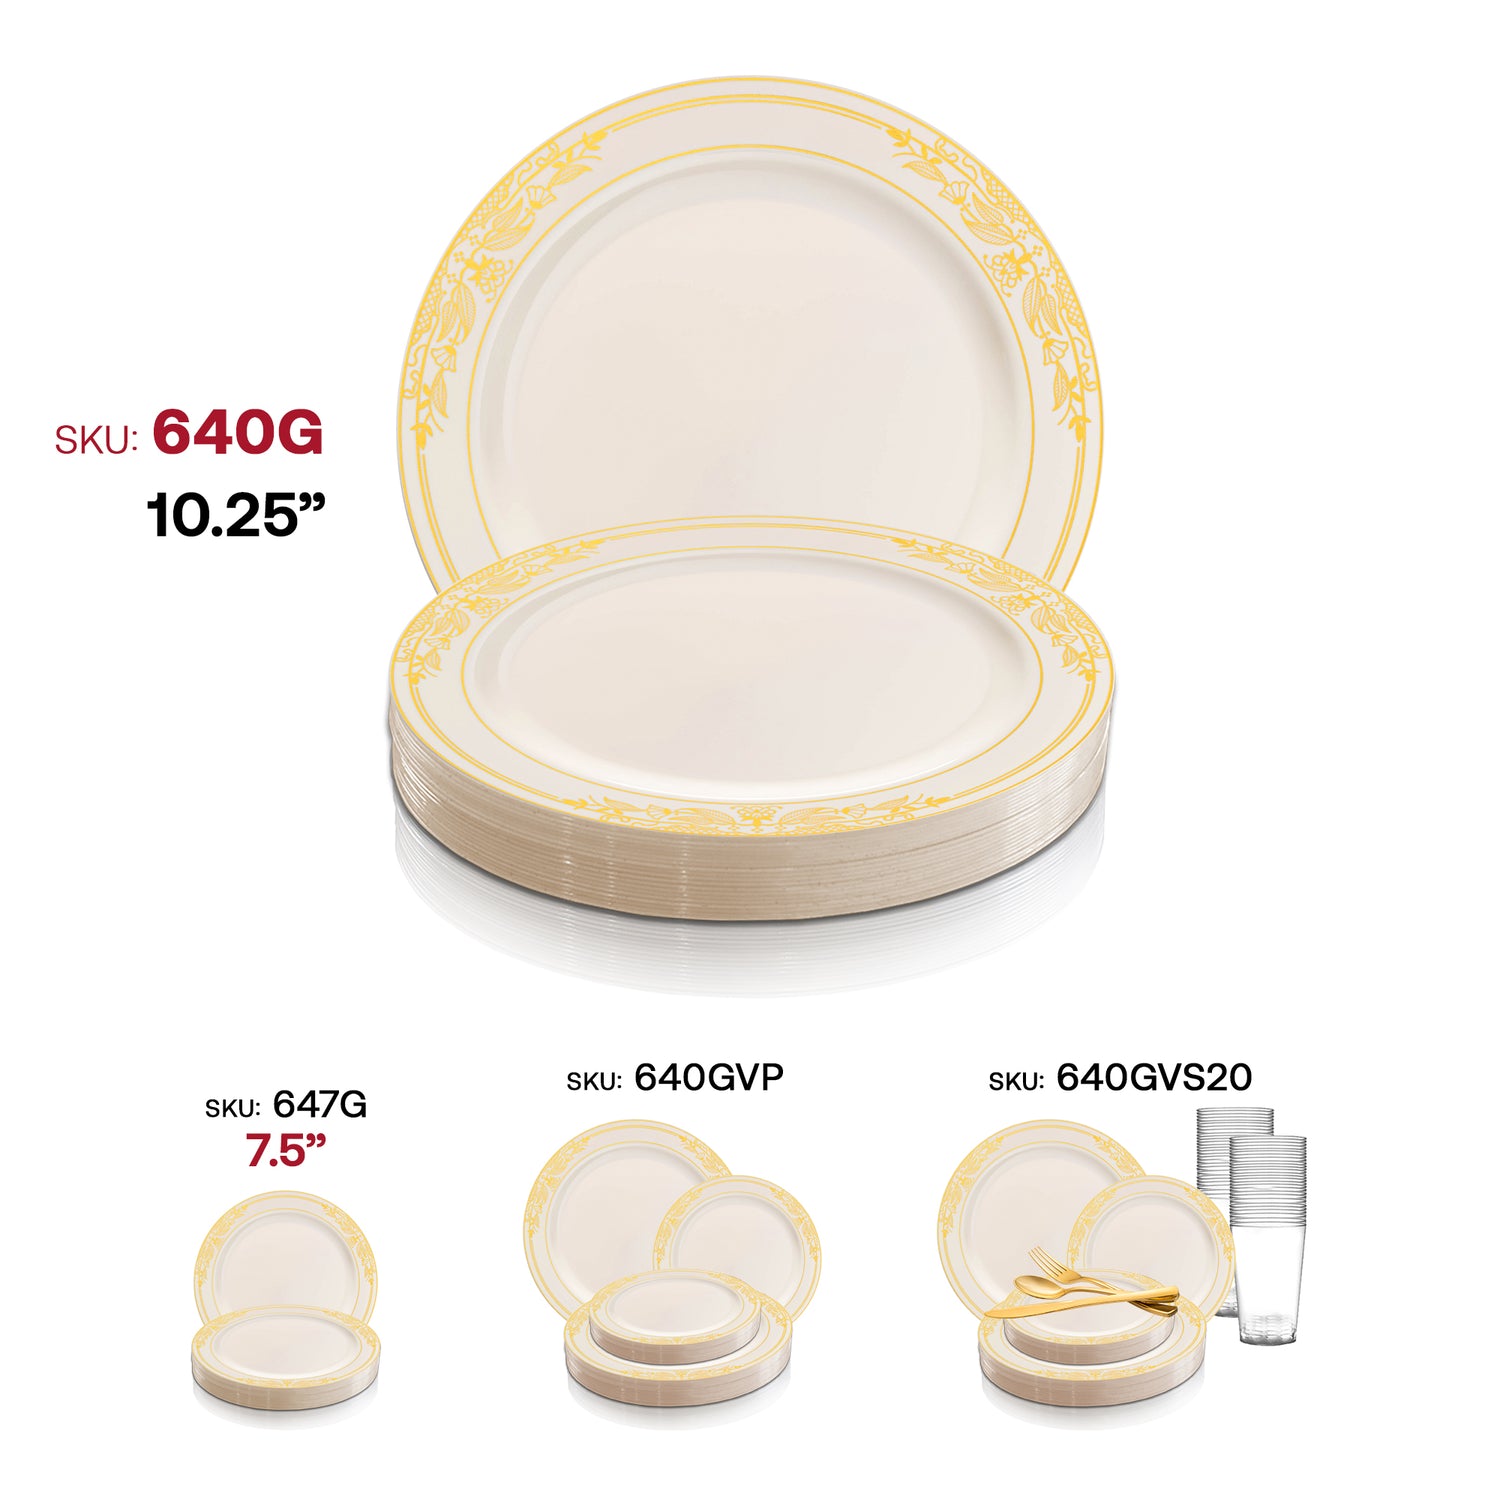 Ivory with Gold Harmony Rim Disposable Plastic Dinner Plates (10.25") SKU | The Kaya Collection